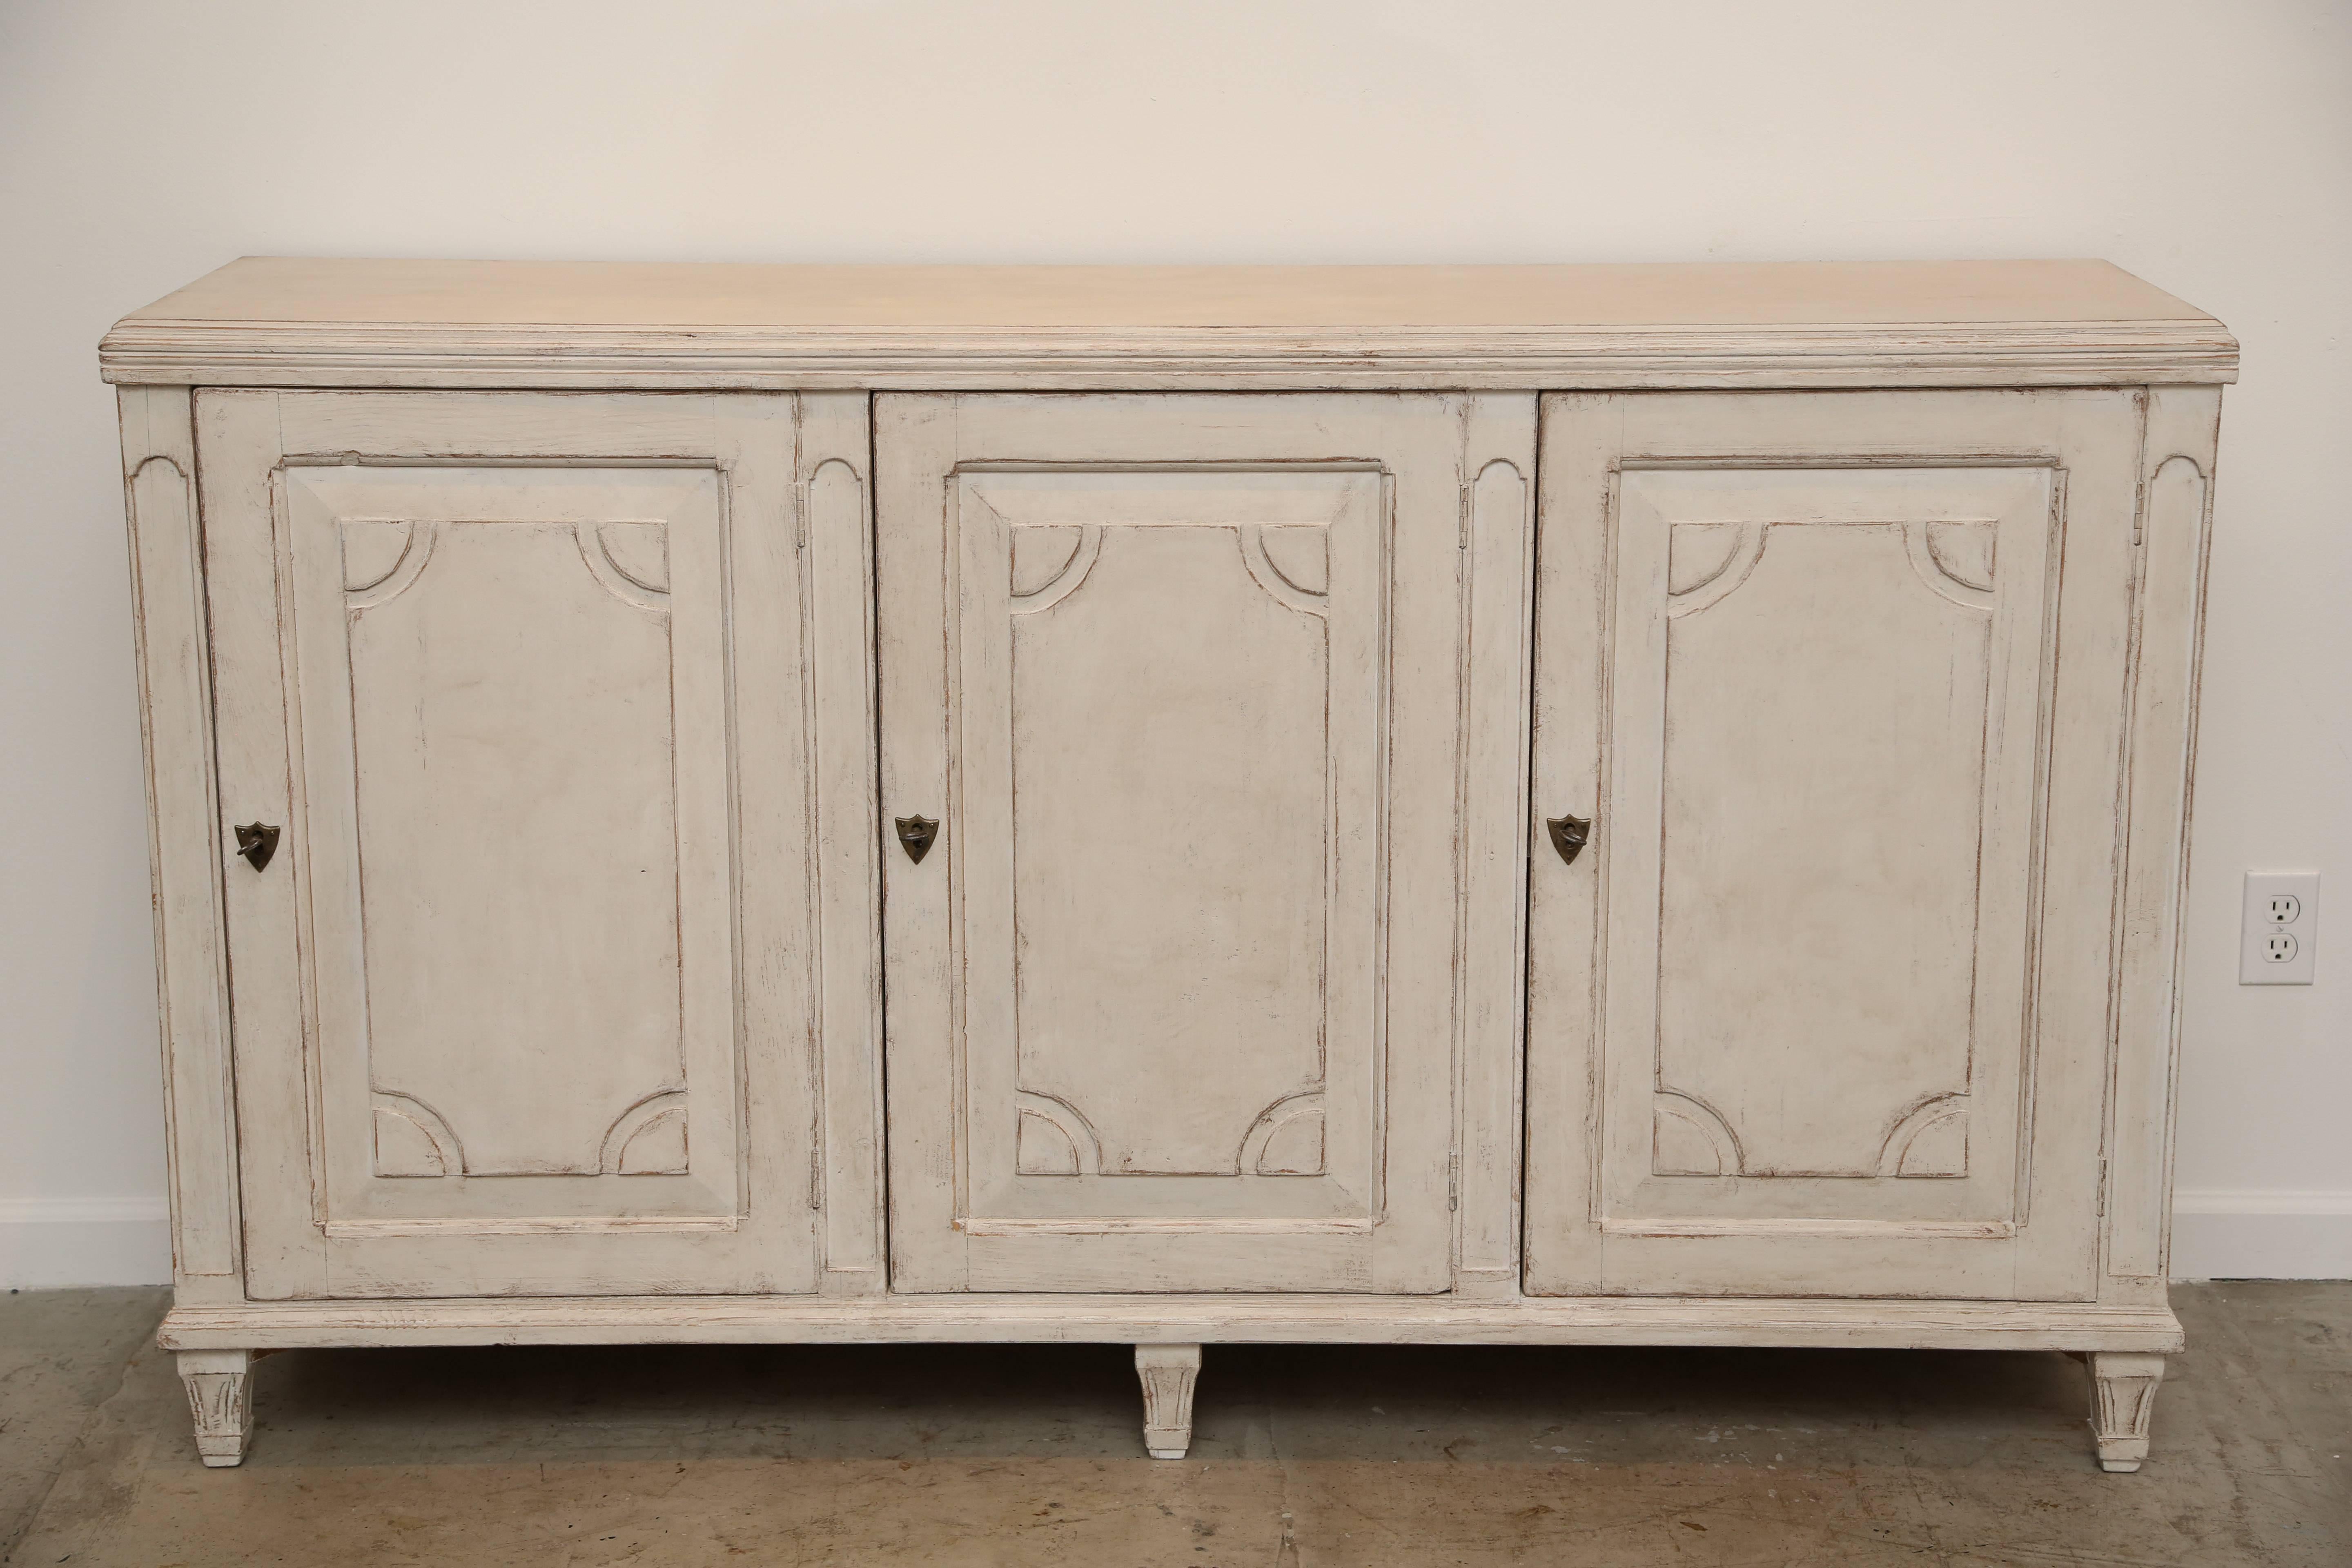 Antique Swedish Gustavian style three door sideboard, with raised panel doors,
the corners of the panels have cresent shape cut-out, carved border around top of cabinet, arched carved panels between the doors. One interior shelf and
bottom shelf.